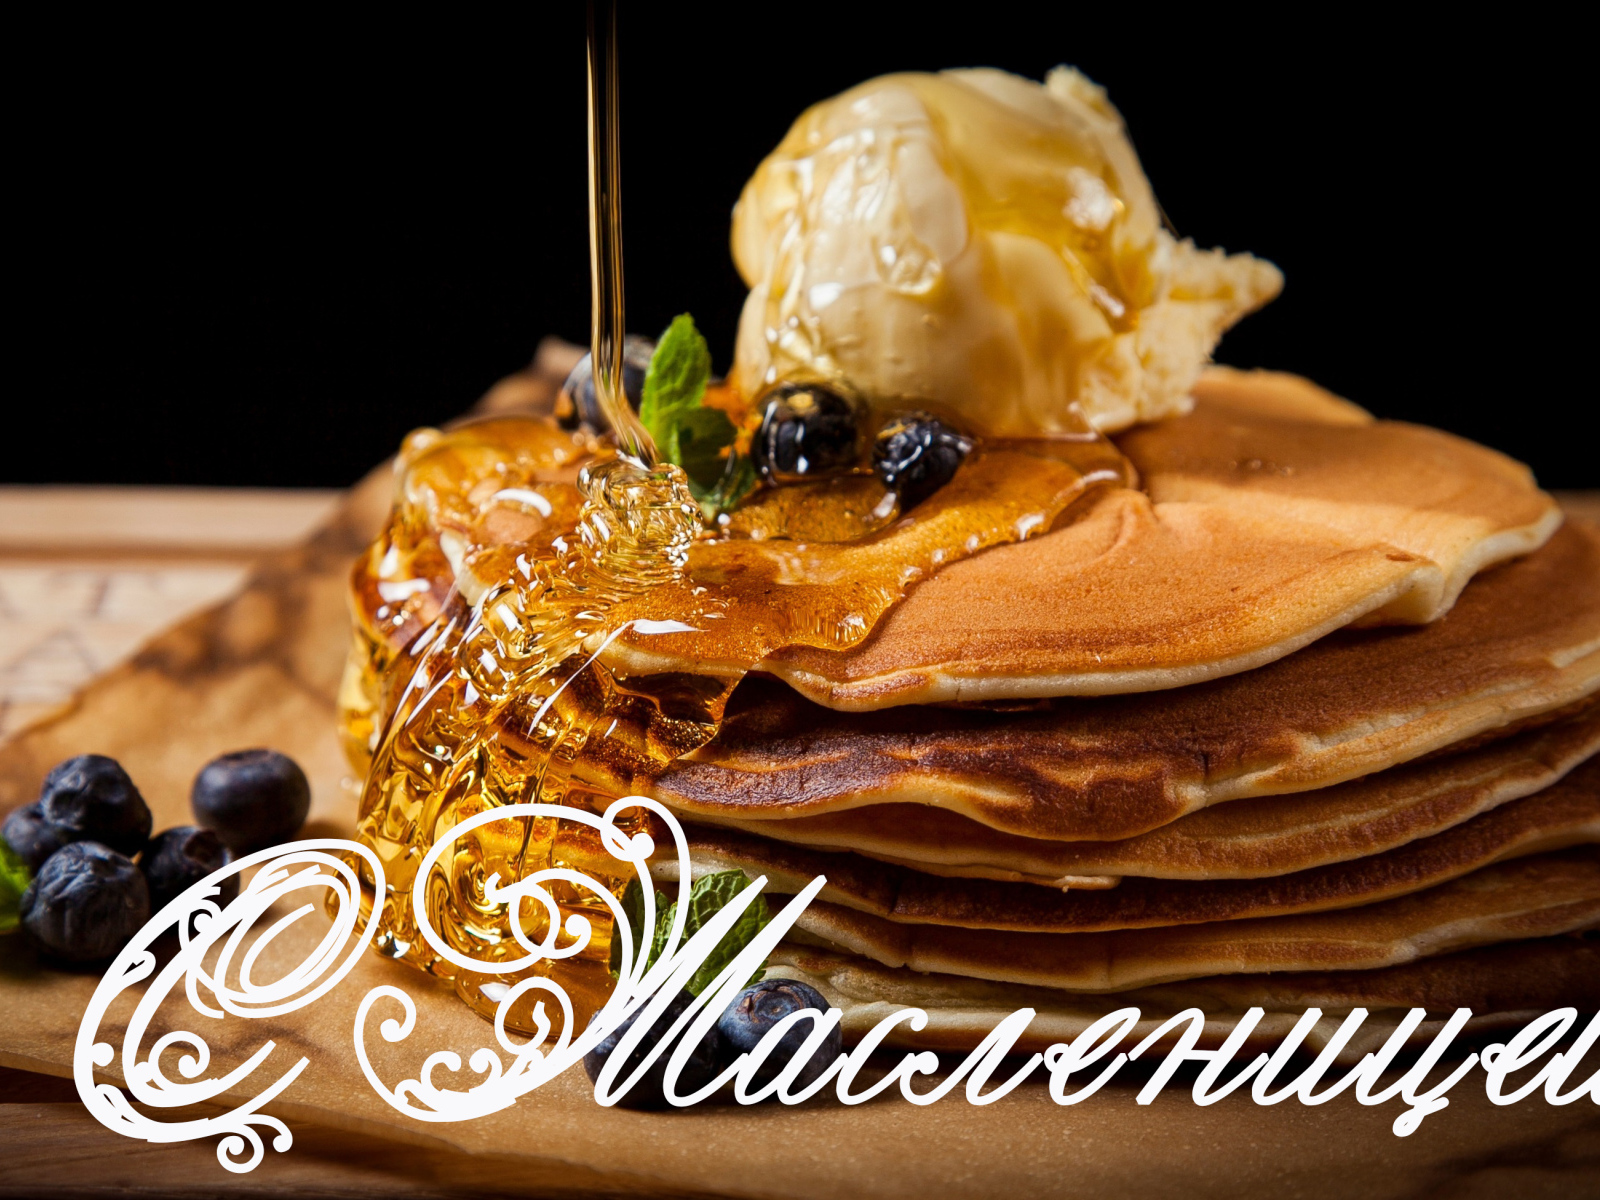 Golden pancakes with ice cream and honey for the holiday Maslenitsa